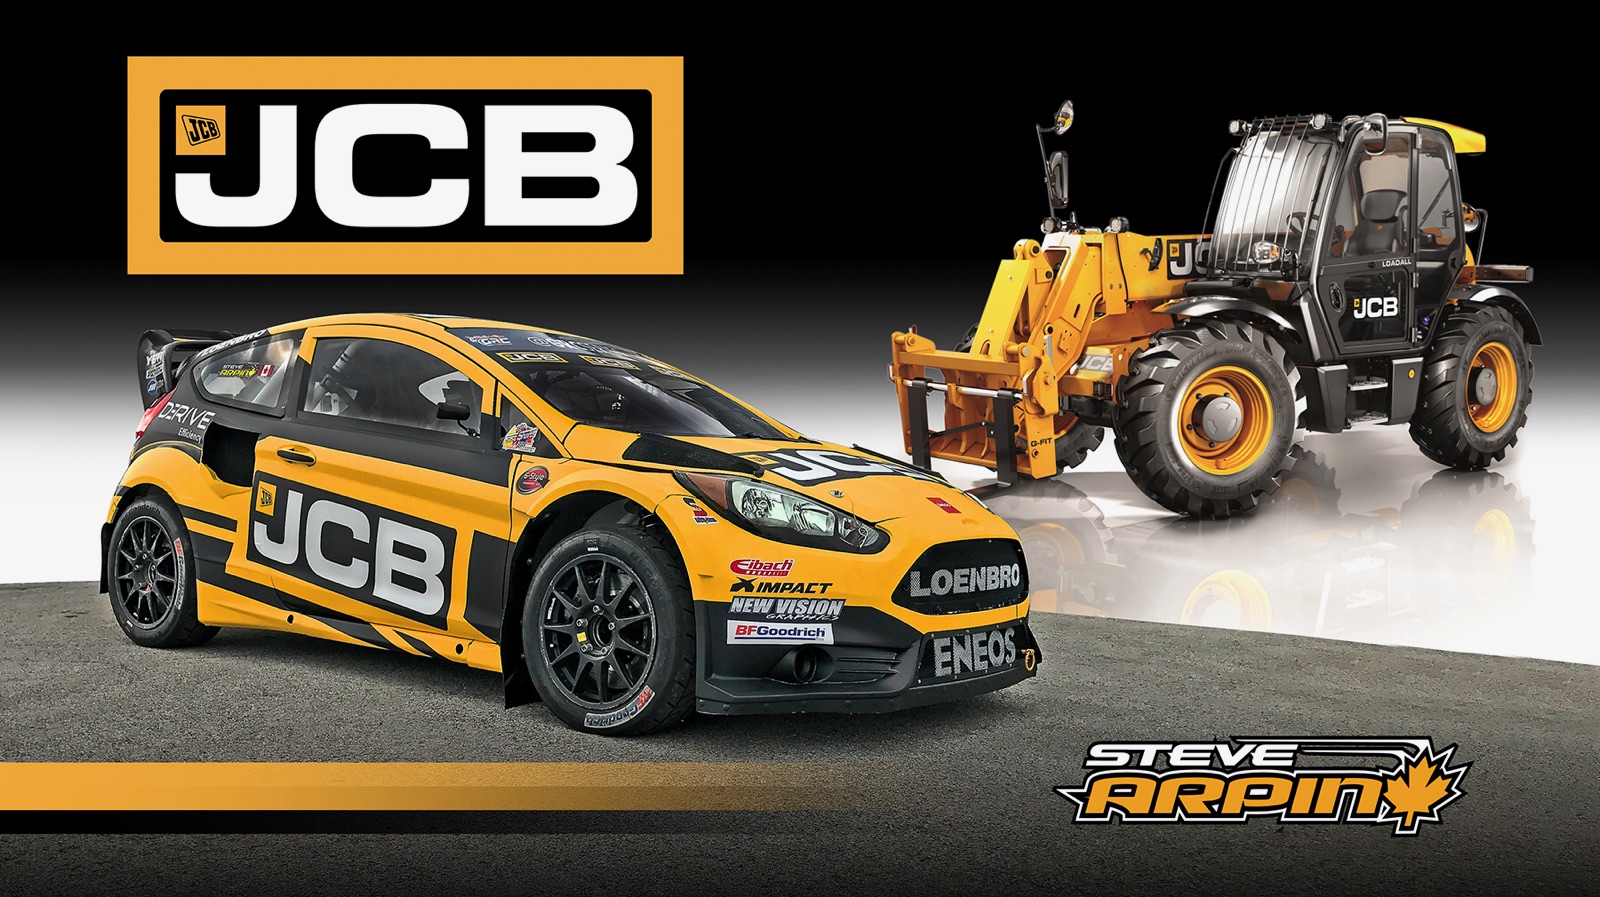 Loenbro Motorsports No. 00 Ford Fiesta ST, driven by Steve Arpin, in JCB livery for the second race of the 2017 Red Bull Global Rallycross season, with a JCB 509-23TC Loadall telescopic handler.